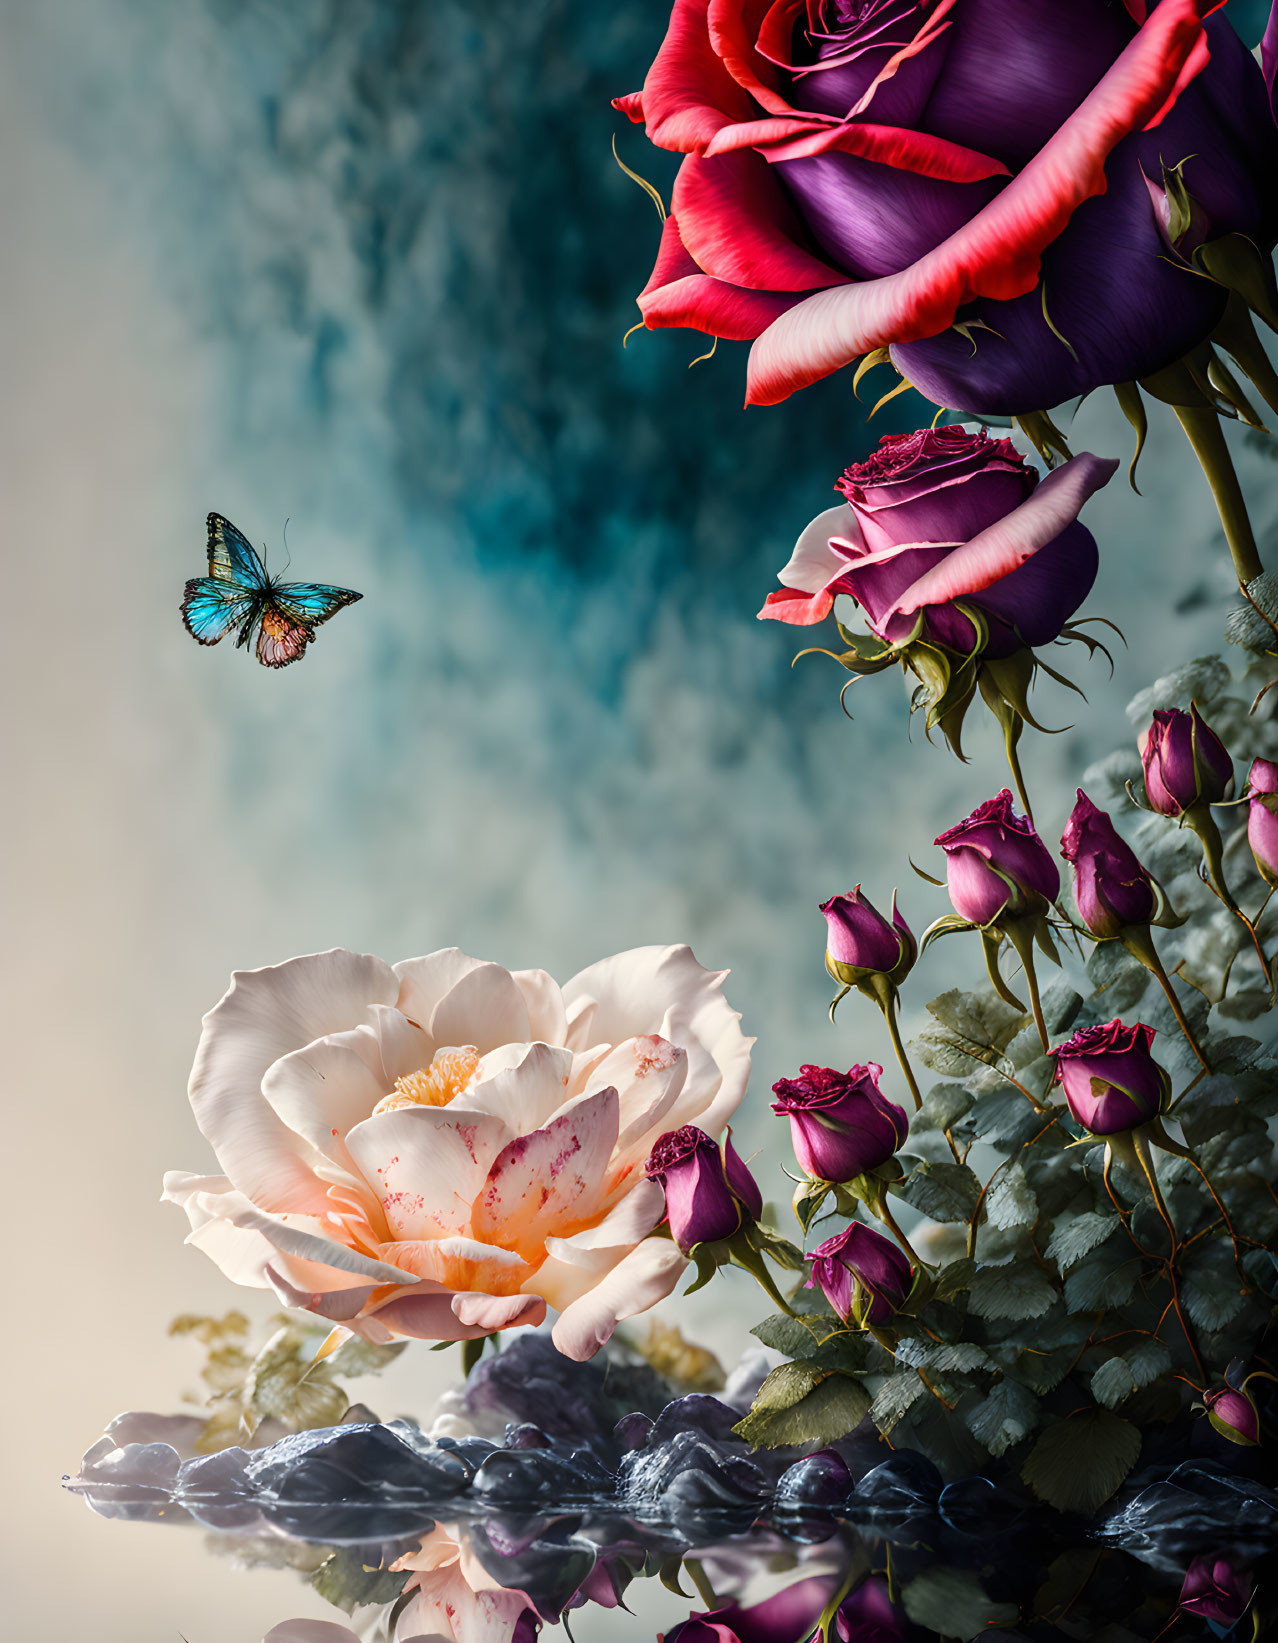 Colorful roses and butterfly under dramatic sky.